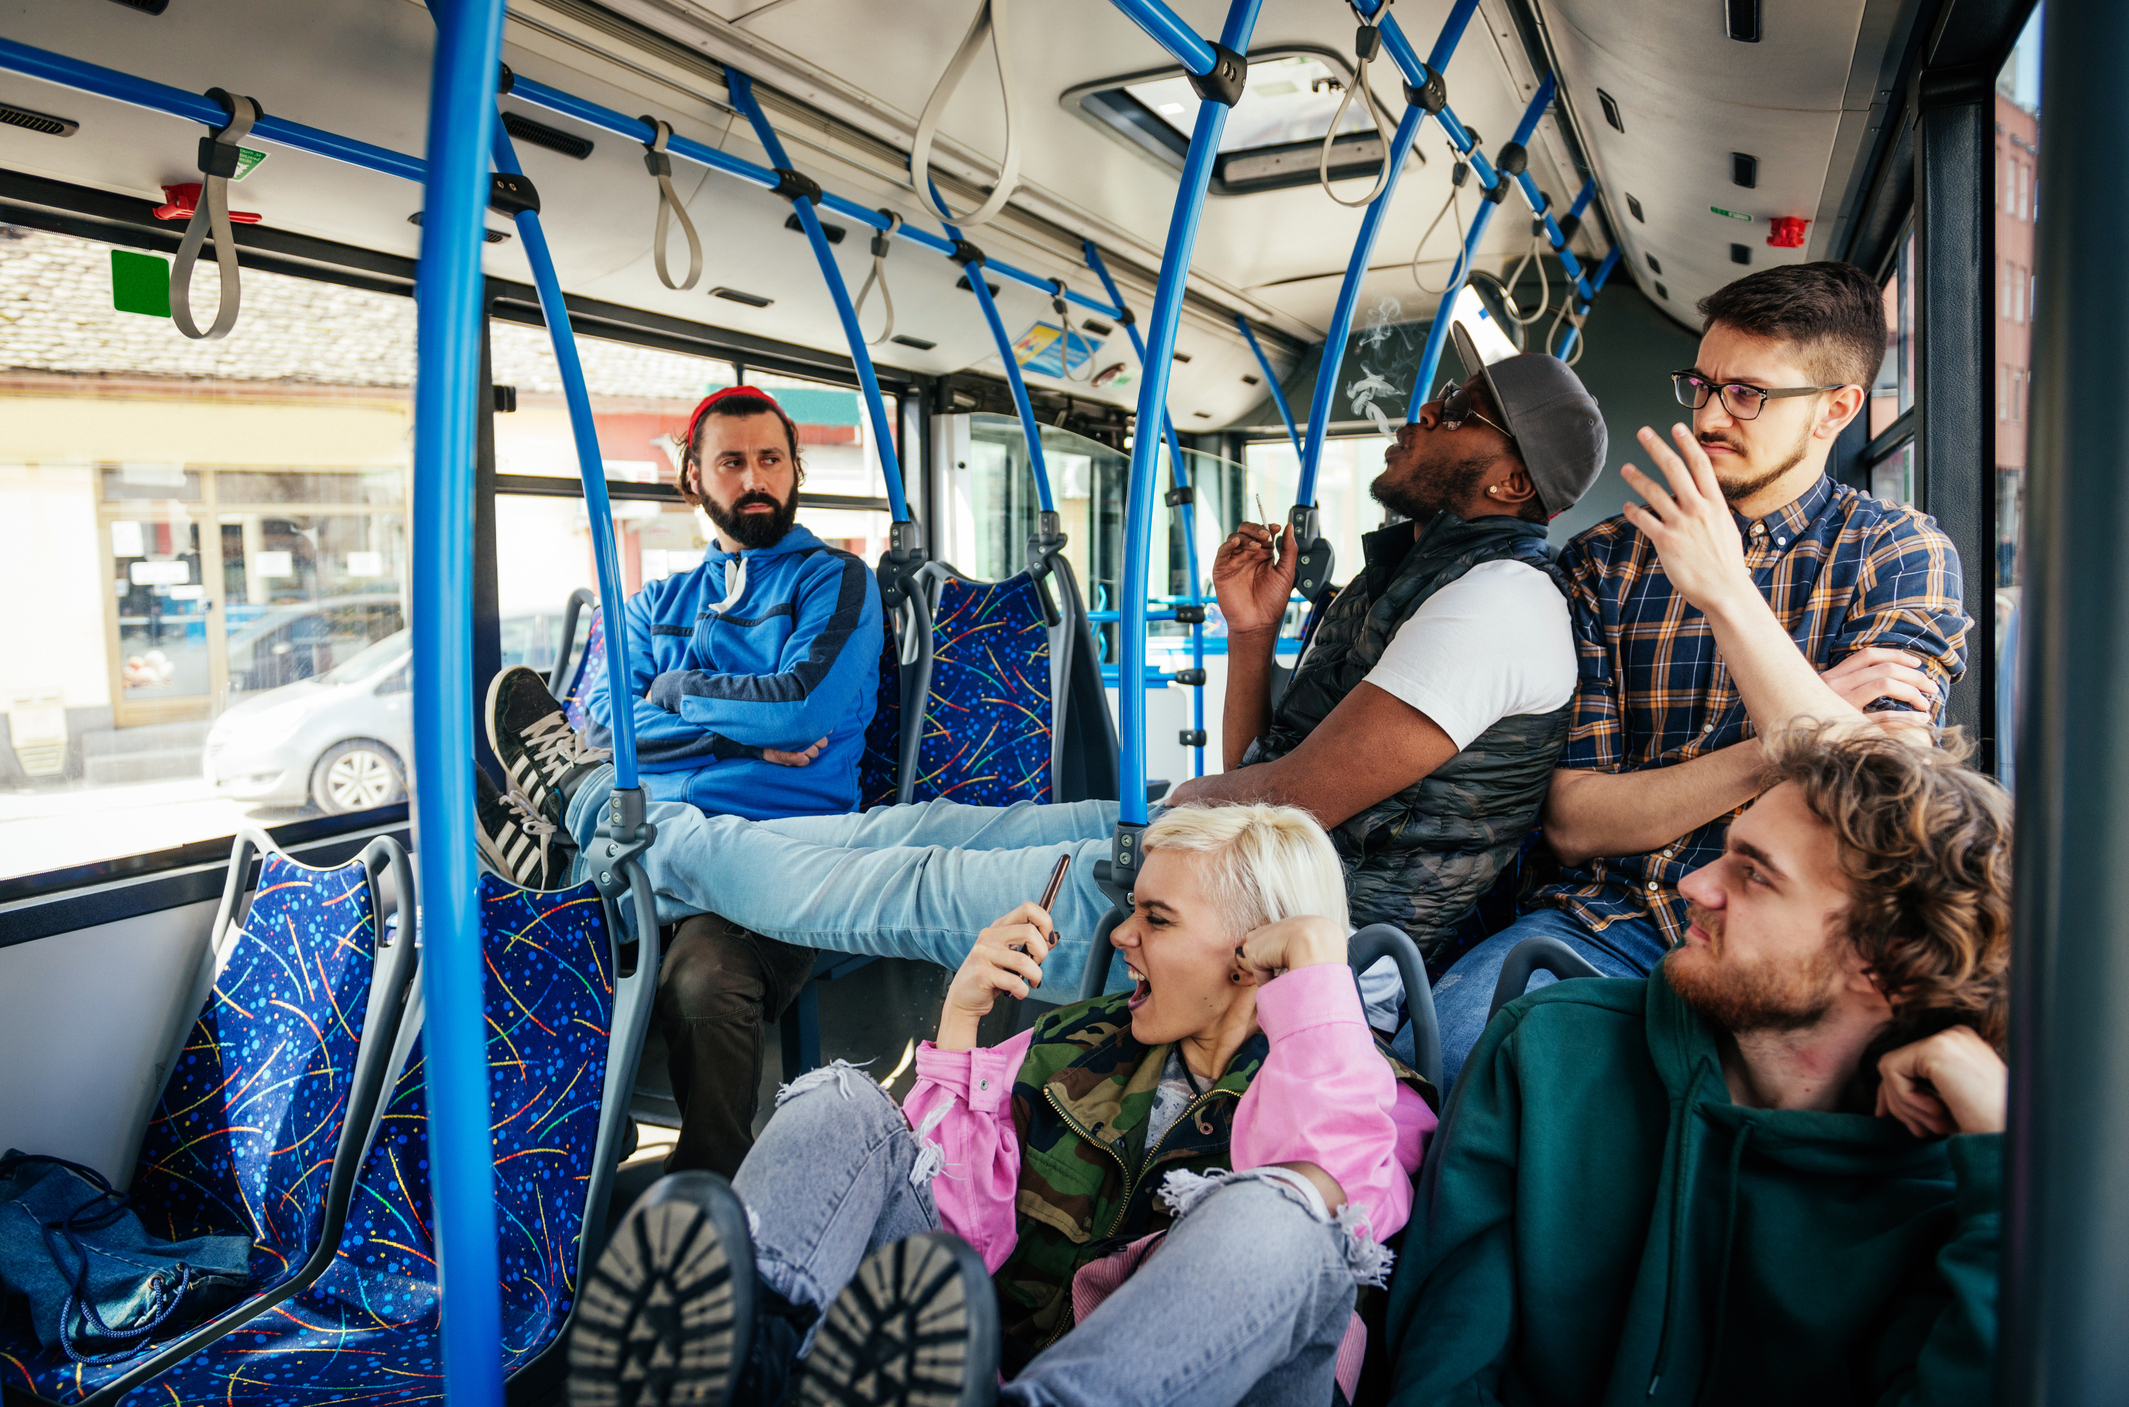 Five people riding on a public bus, some seated and one lying down with feet up, interacting casually